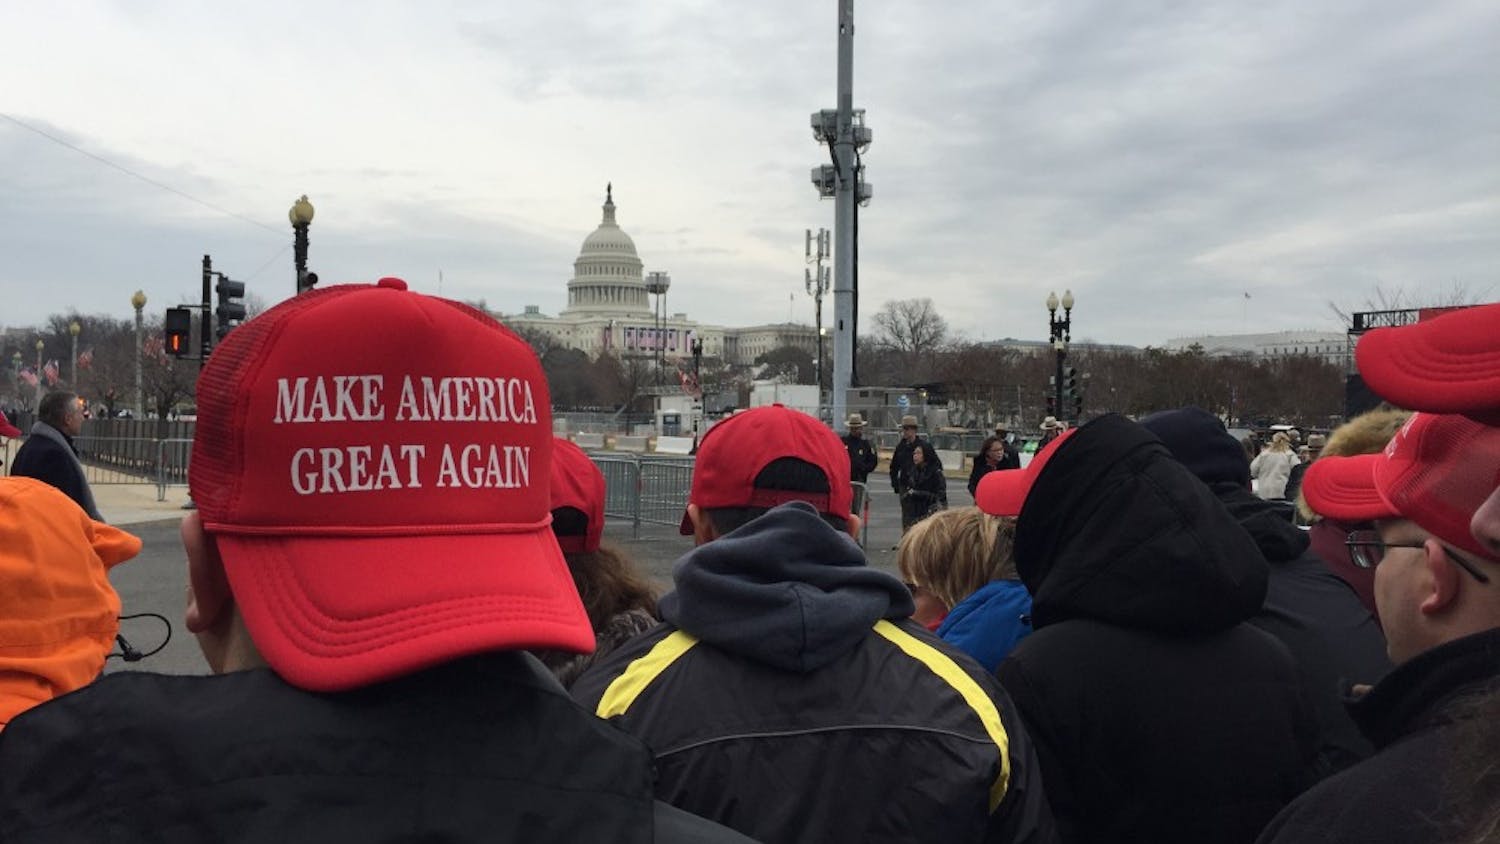 Trump supporters don "Make America Great Again" hats in the moments leading up to the president's inauguration.&nbsp;